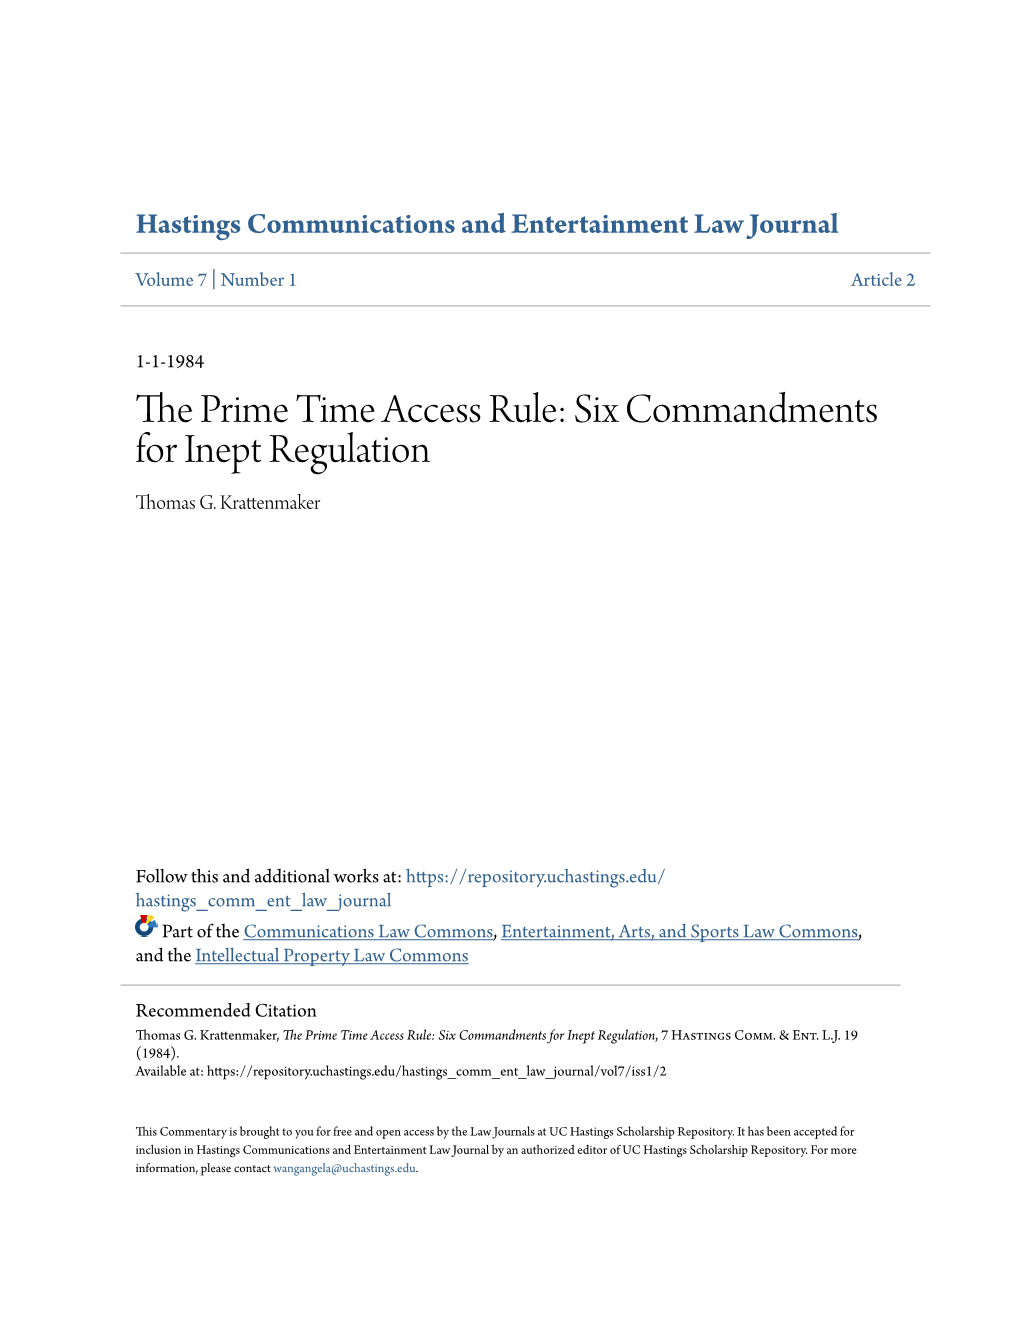 The Prime Time Access Rule: Six Commandments for Inept Regulation, 7 Hastings Comm